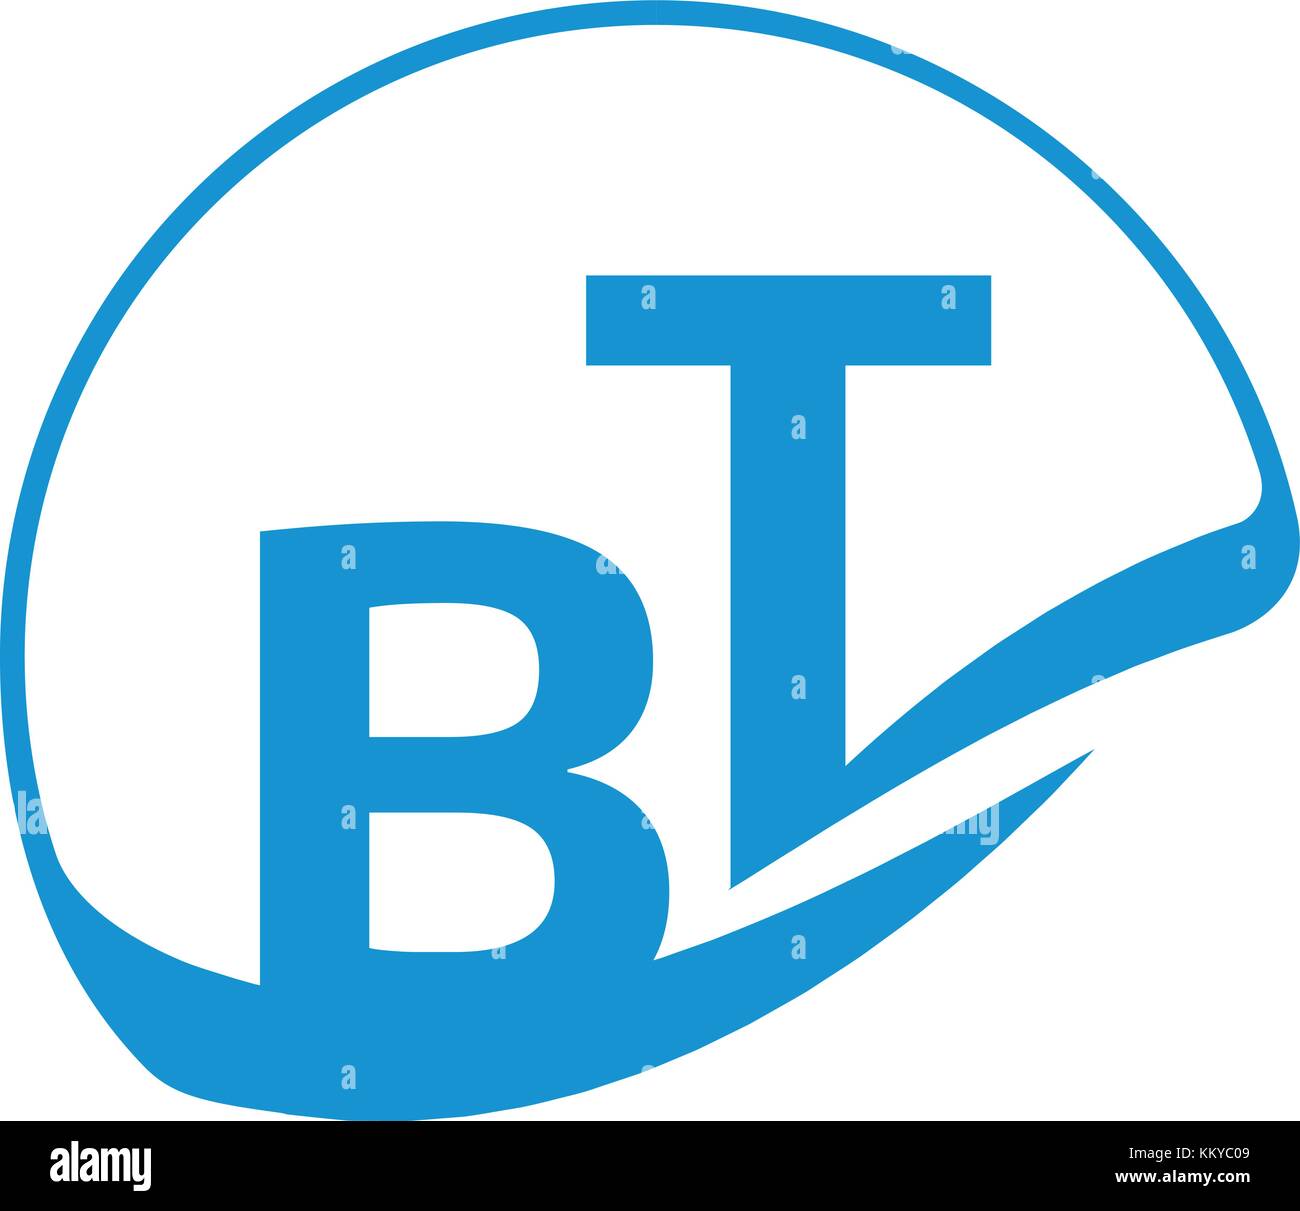 BT Logo supported by hands like shapes to show cooperation and the blue color denotes confidence. Stock Vector